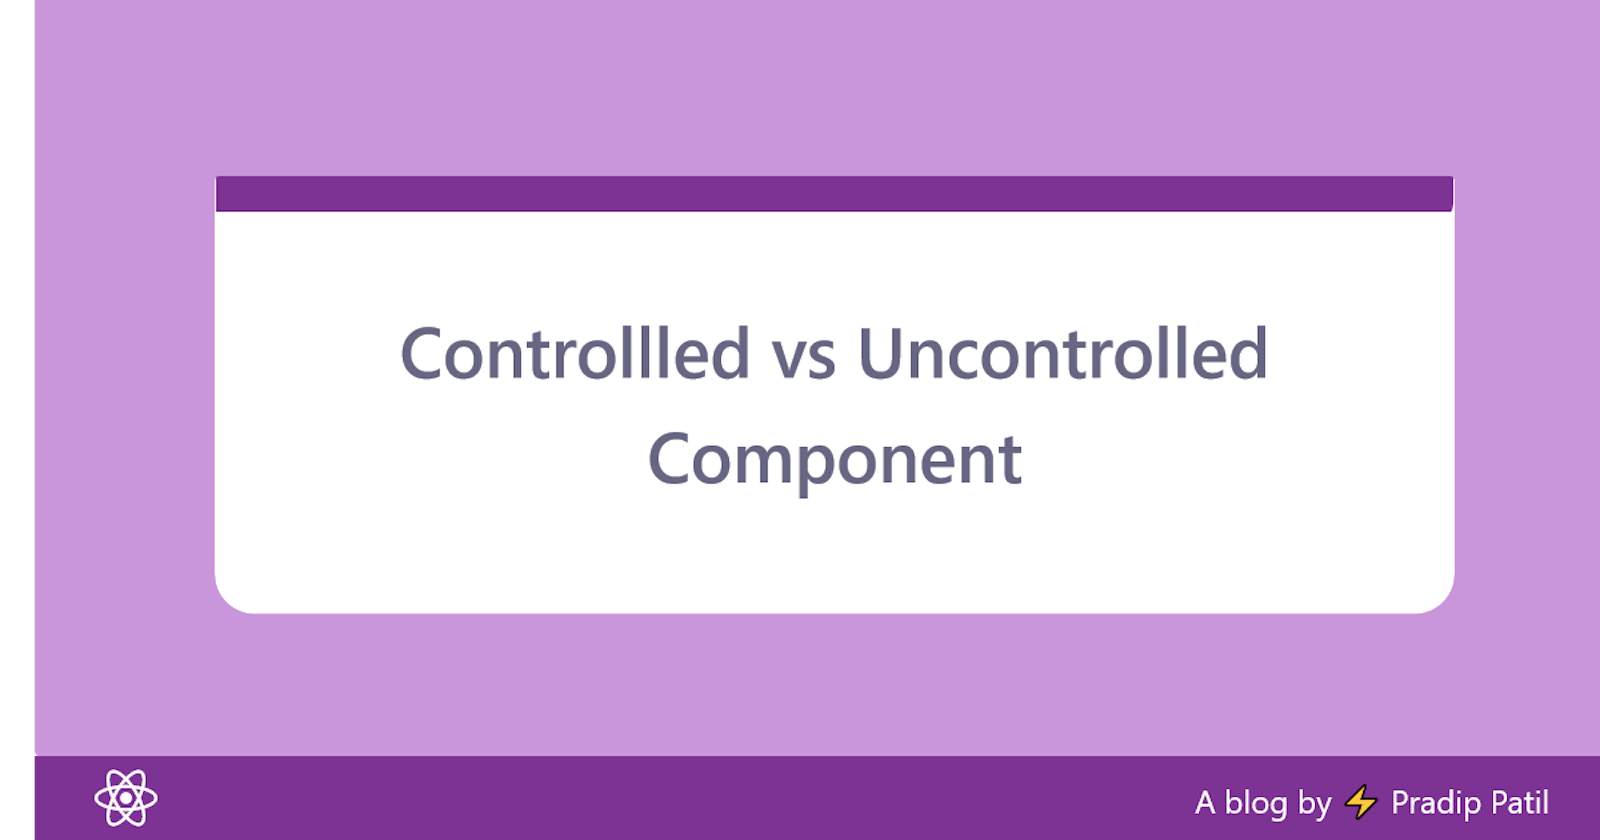 Controlled vs Uncontrolled Component in React